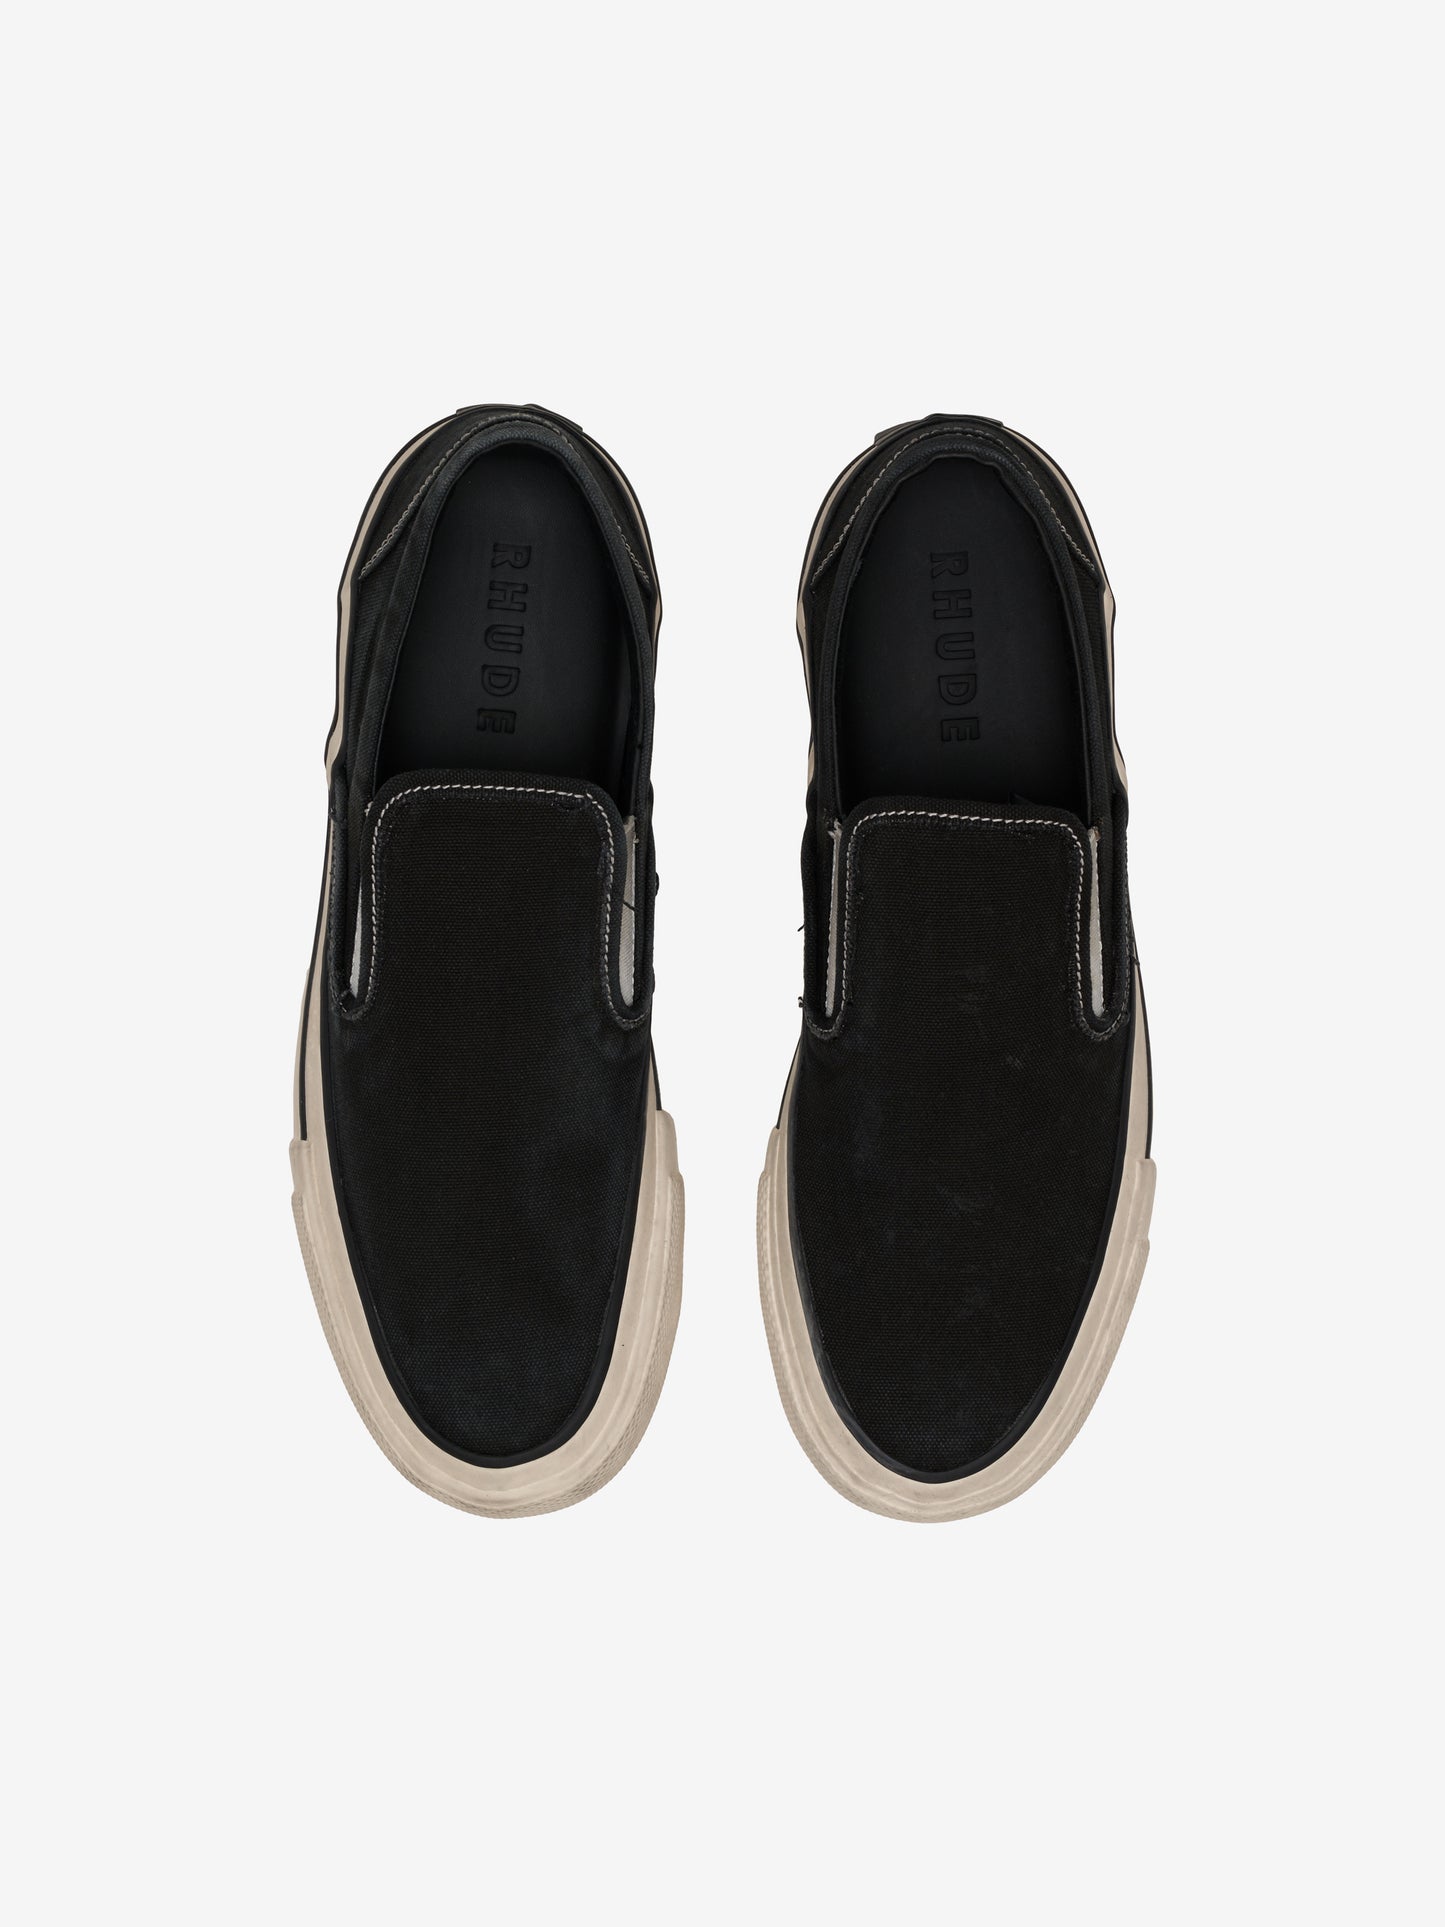 WASHED CANVAS SLIP ON SNEAKER